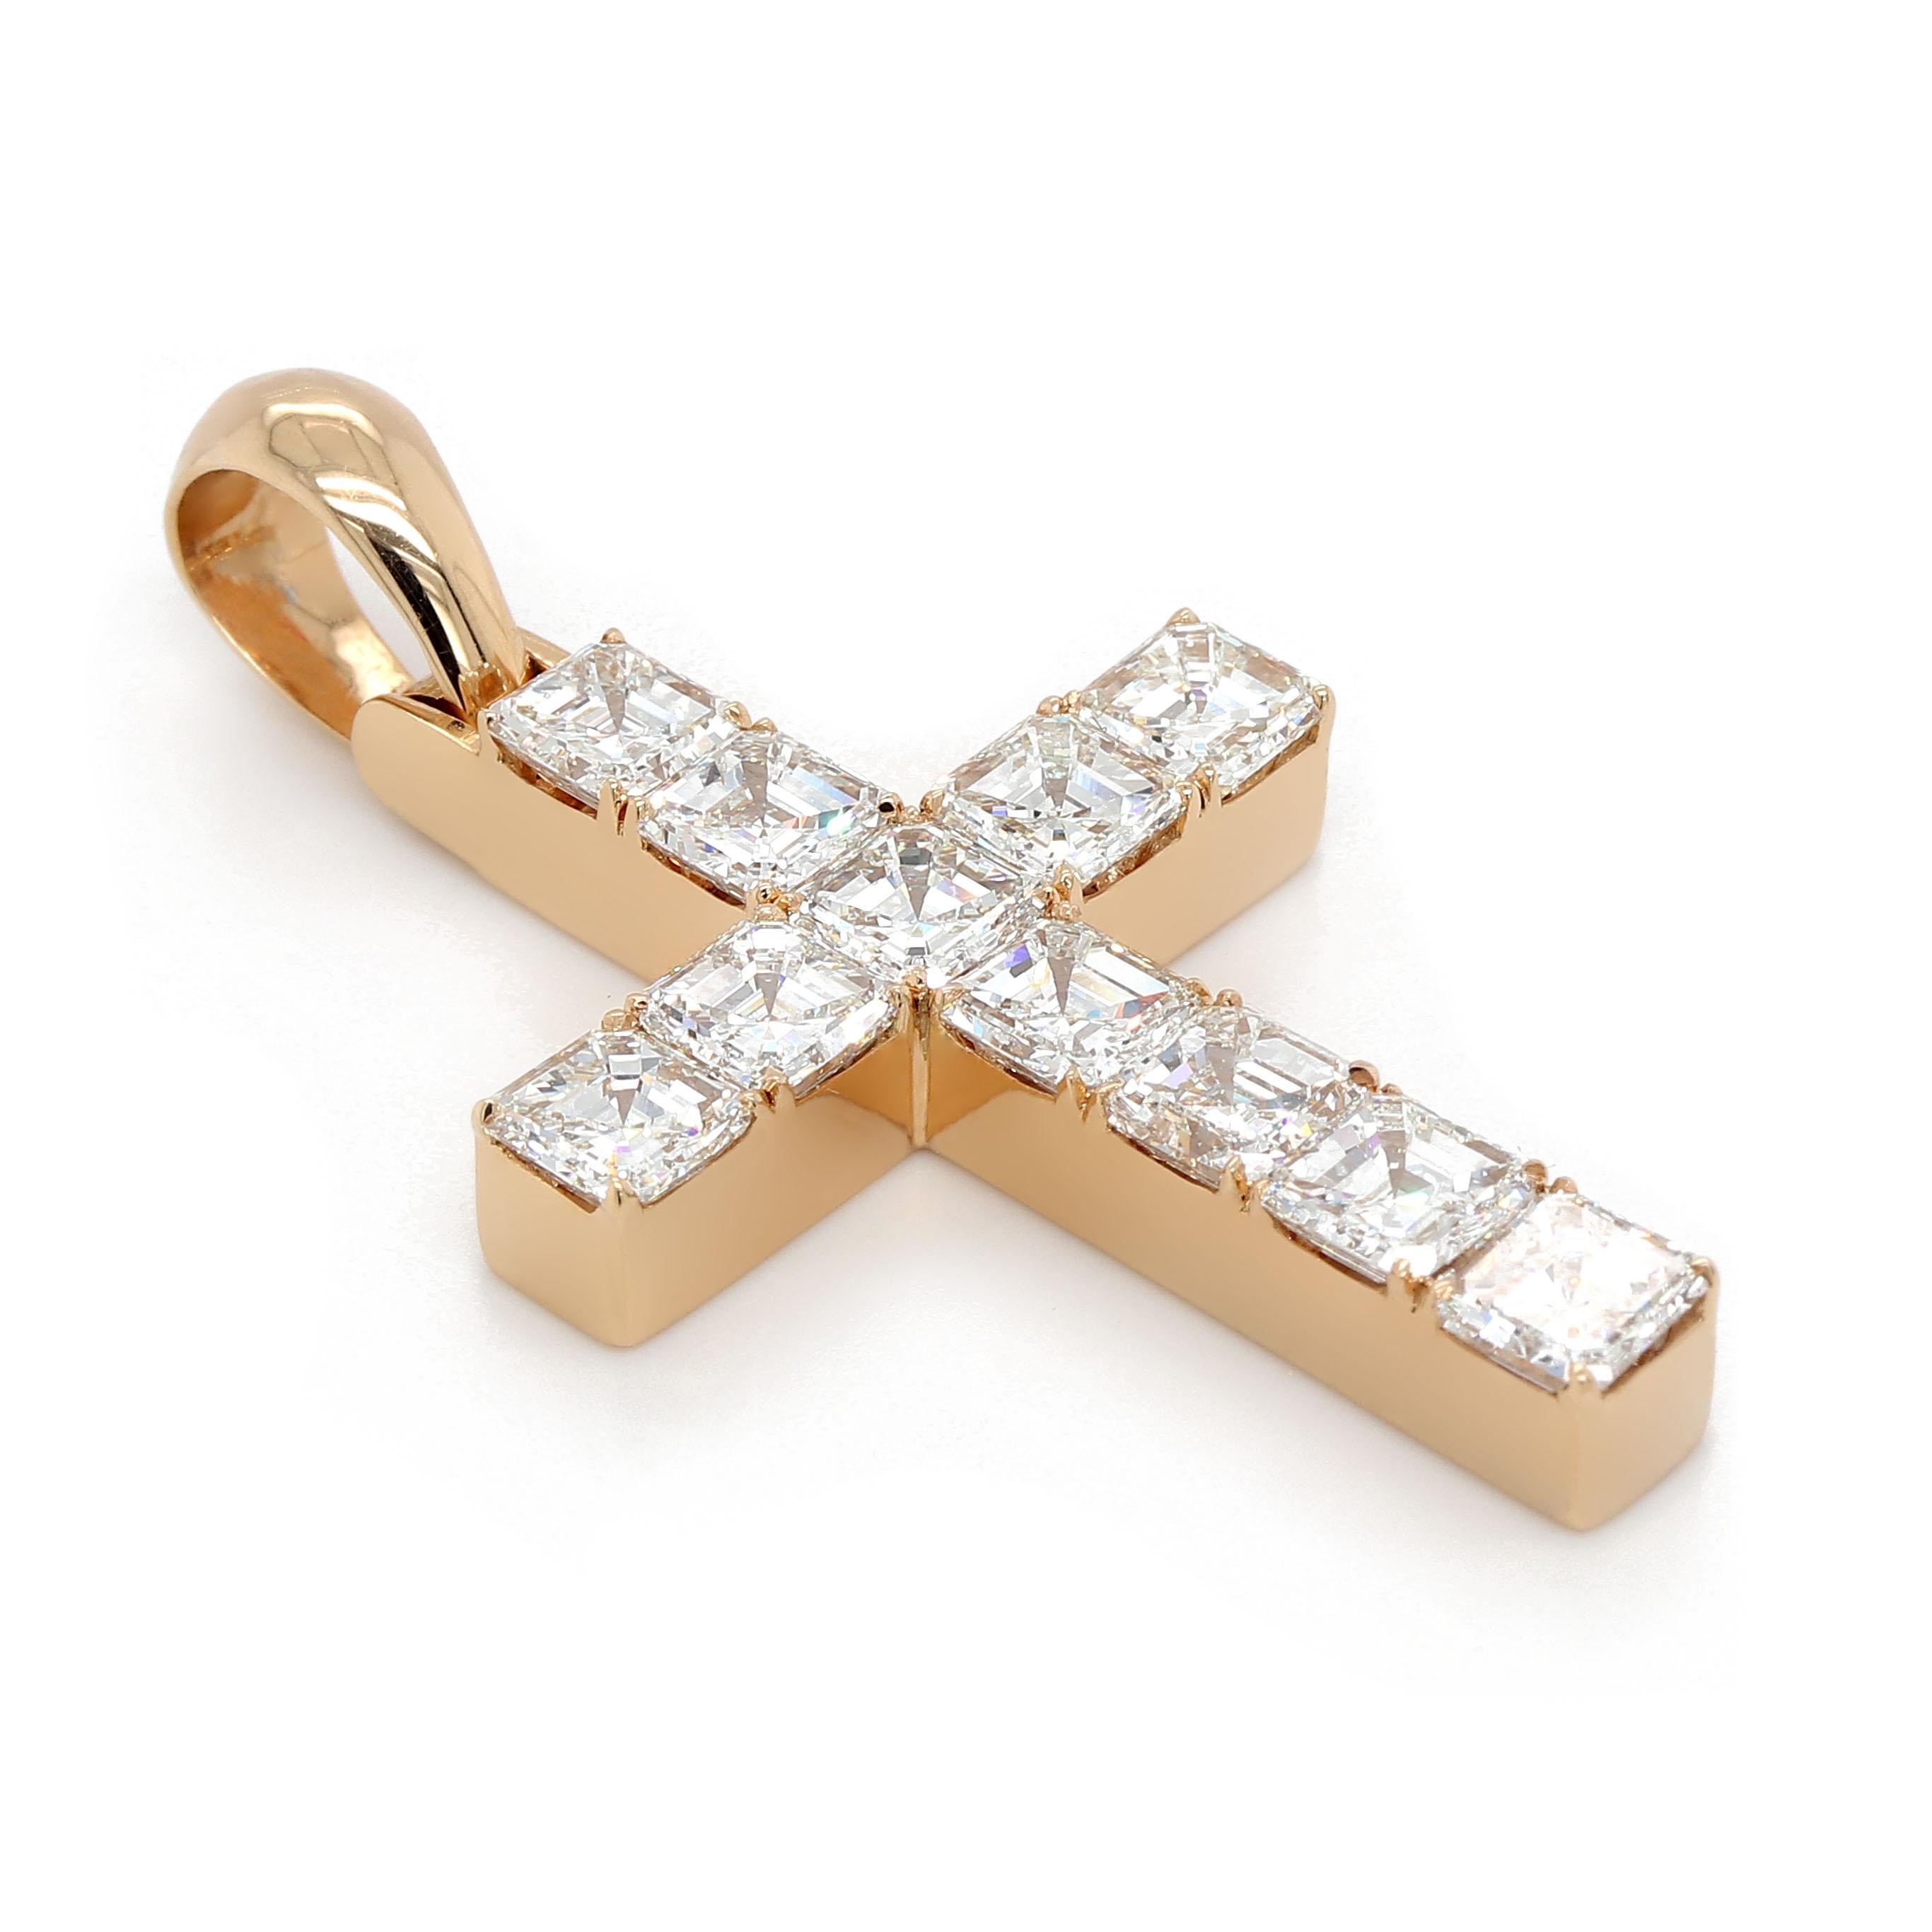 Cross Pendant with 11 asscher cut diamonds of about 6.24 carats with a clarity of VS and color E. Diamonds are set in an 18k  yellow gold pendant. The pendant weighs approximately 10.92 grams.